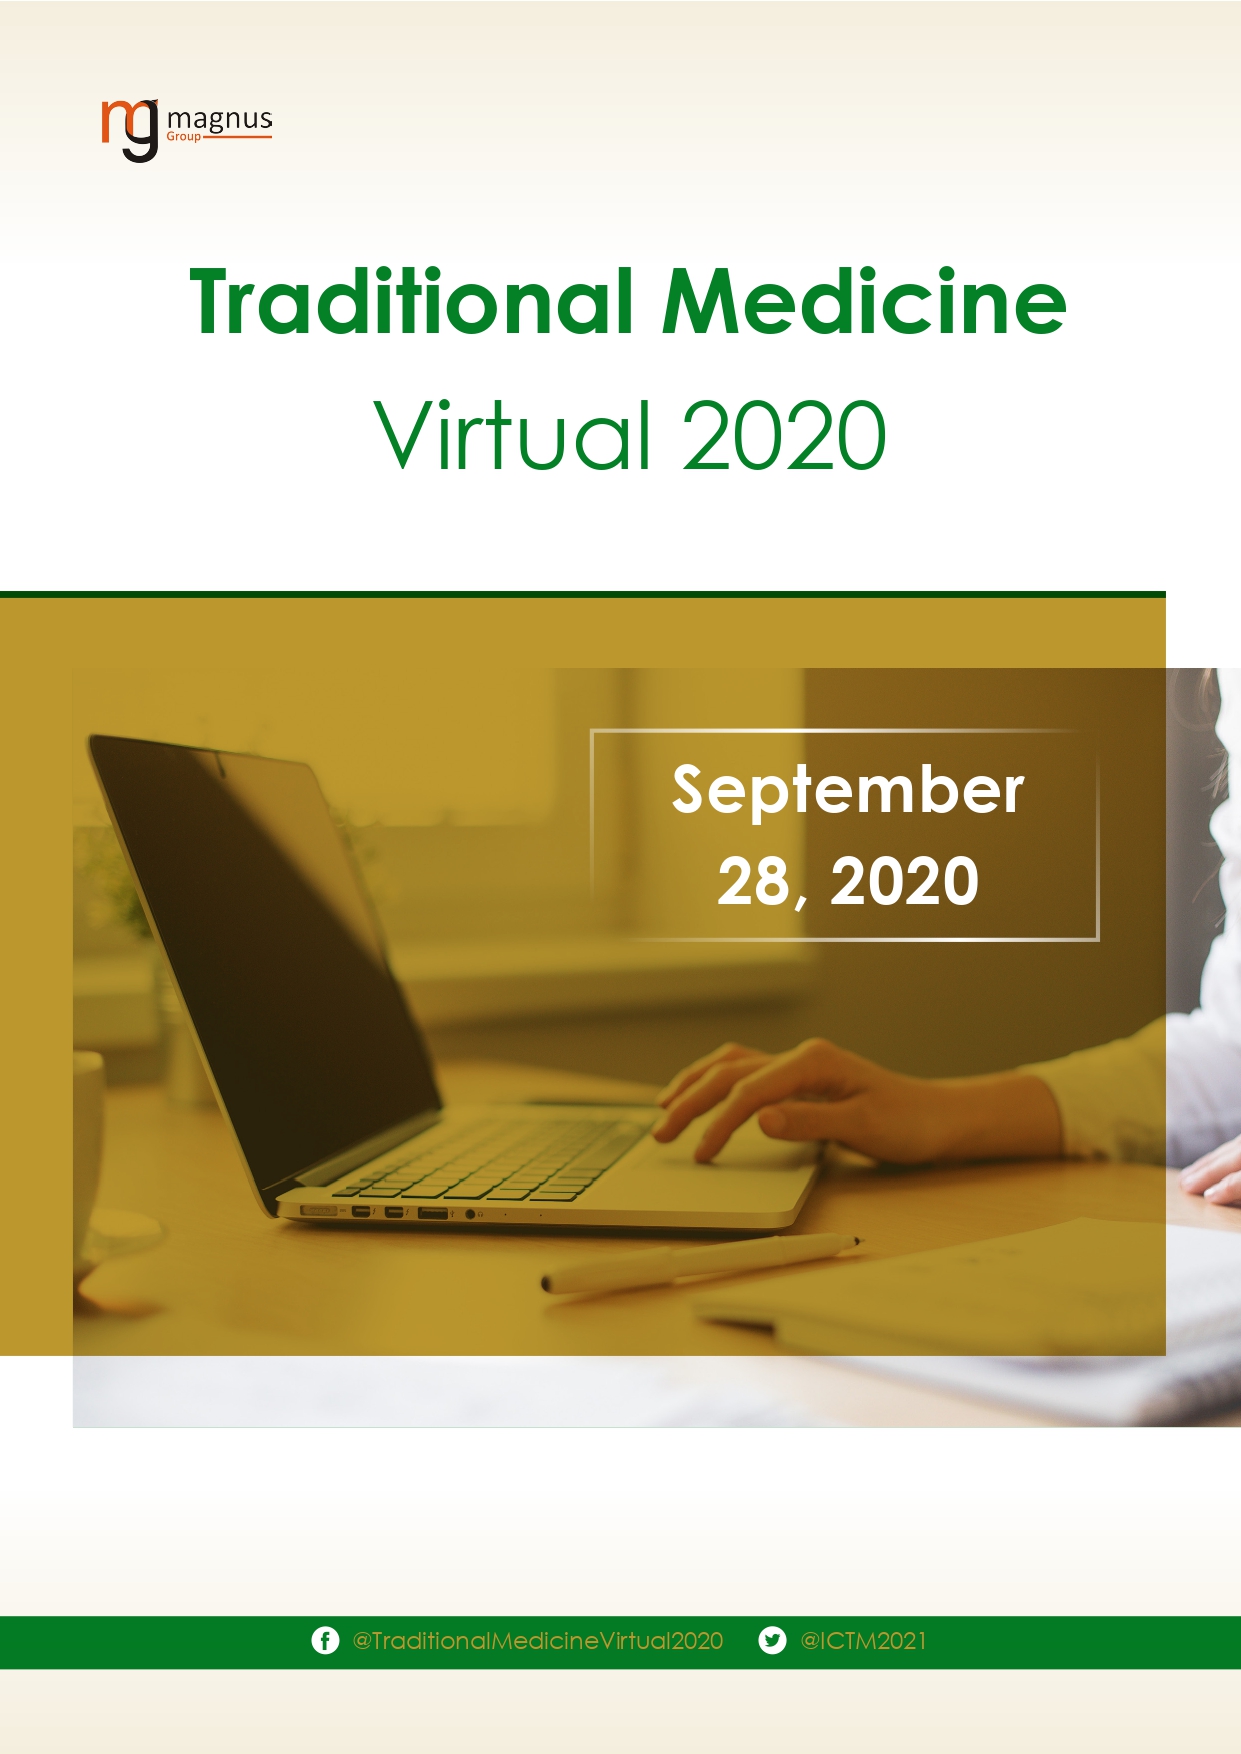 International Webinar on Traditional Medicine, Ethnomedicine and Natural Therapies | Online Event Book